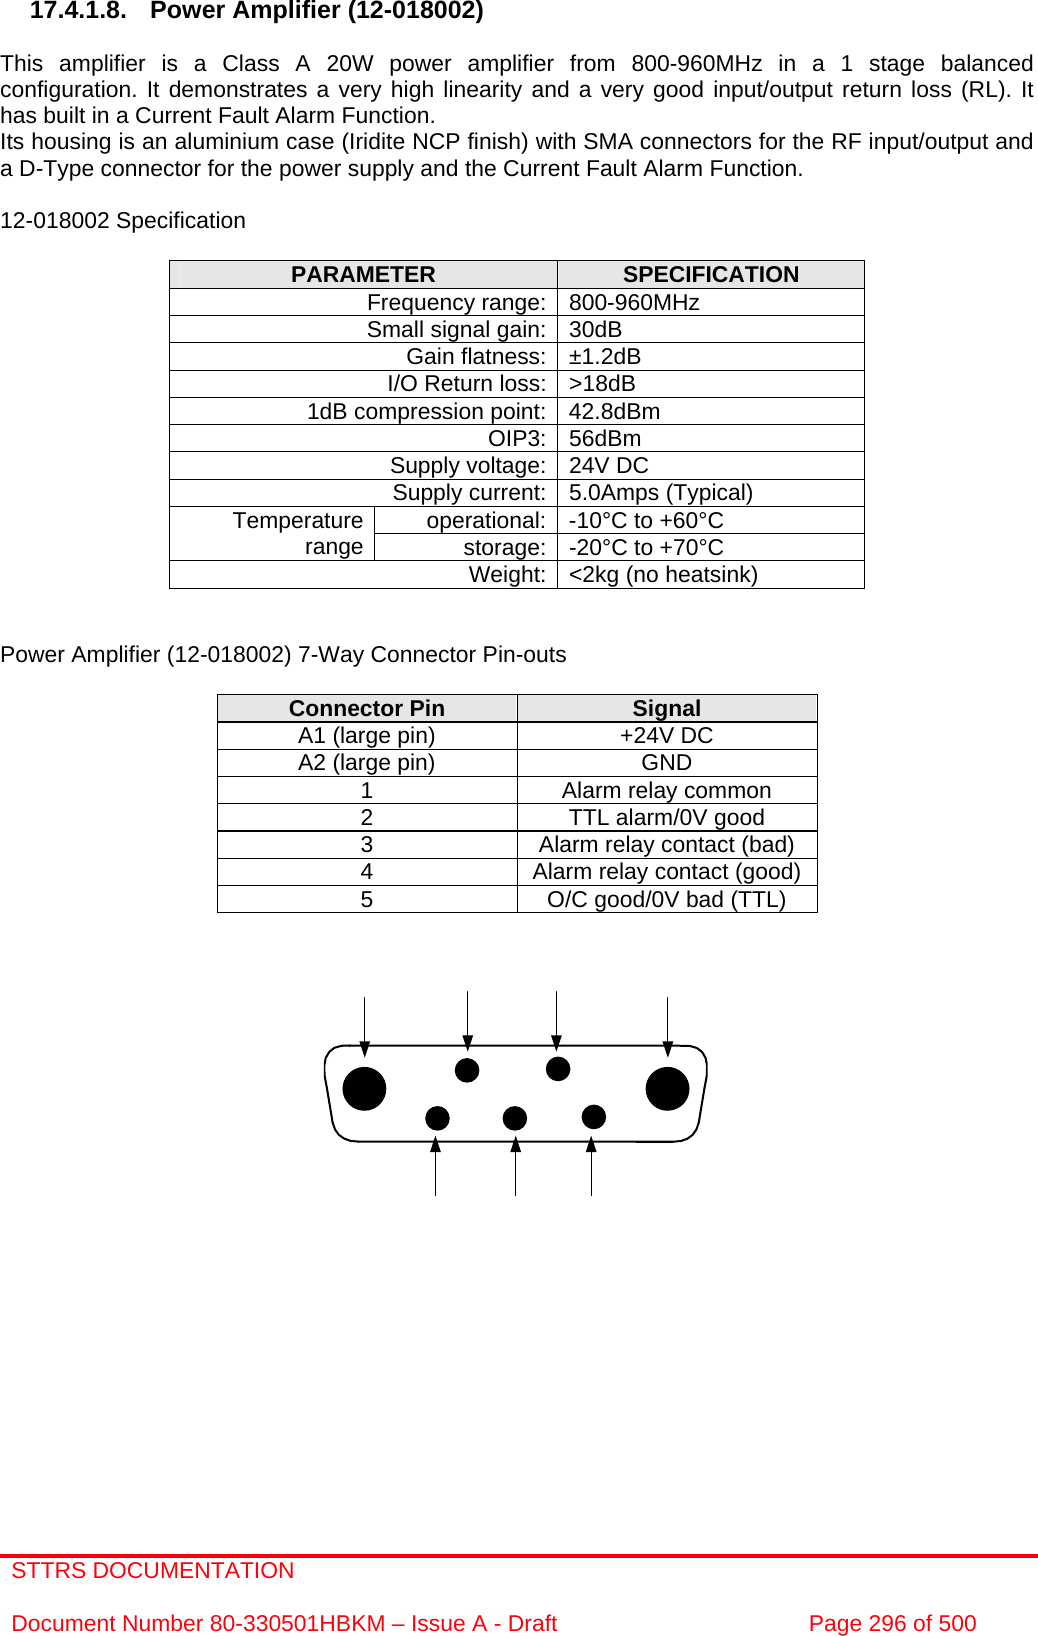 STTRS DOCUMENTATION  Document Number 80-330501HBKM – Issue A - Draft  Page 296 of 500   17.4.1.8.  Power Amplifier (12-018002)  This amplifier is a Class A 20W power amplifier from 800-960MHz in a 1 stage balanced configuration. It demonstrates a very high linearity and a very good input/output return loss (RL). It has built in a Current Fault Alarm Function. Its housing is an aluminium case (Iridite NCP finish) with SMA connectors for the RF input/output and a D-Type connector for the power supply and the Current Fault Alarm Function.  12-018002 Specification  PARAMETER  SPECIFICATION Frequency range: 800-960MHz Small signal gain: 30dB Gain flatness: ±1.2dB I/O Return loss: &gt;18dB 1dB compression point: 42.8dBm OIP3: 56dBm Supply voltage: 24V DC Supply current: 5.0Amps (Typical) operational: -10°C to +60°C Temperature range  storage: -20°C to +70°C Weight: &lt;2kg (no heatsink)   Power Amplifier (12-018002) 7-Way Connector Pin-outs  Connector Pin  Signal A1 (large pin)  +24V DC A2 (large pin)  GND 1  Alarm relay common 2  TTL alarm/0V good 3  Alarm relay contact (bad) 4  Alarm relay contact (good) 5  O/C good/0V bad (TTL)                   